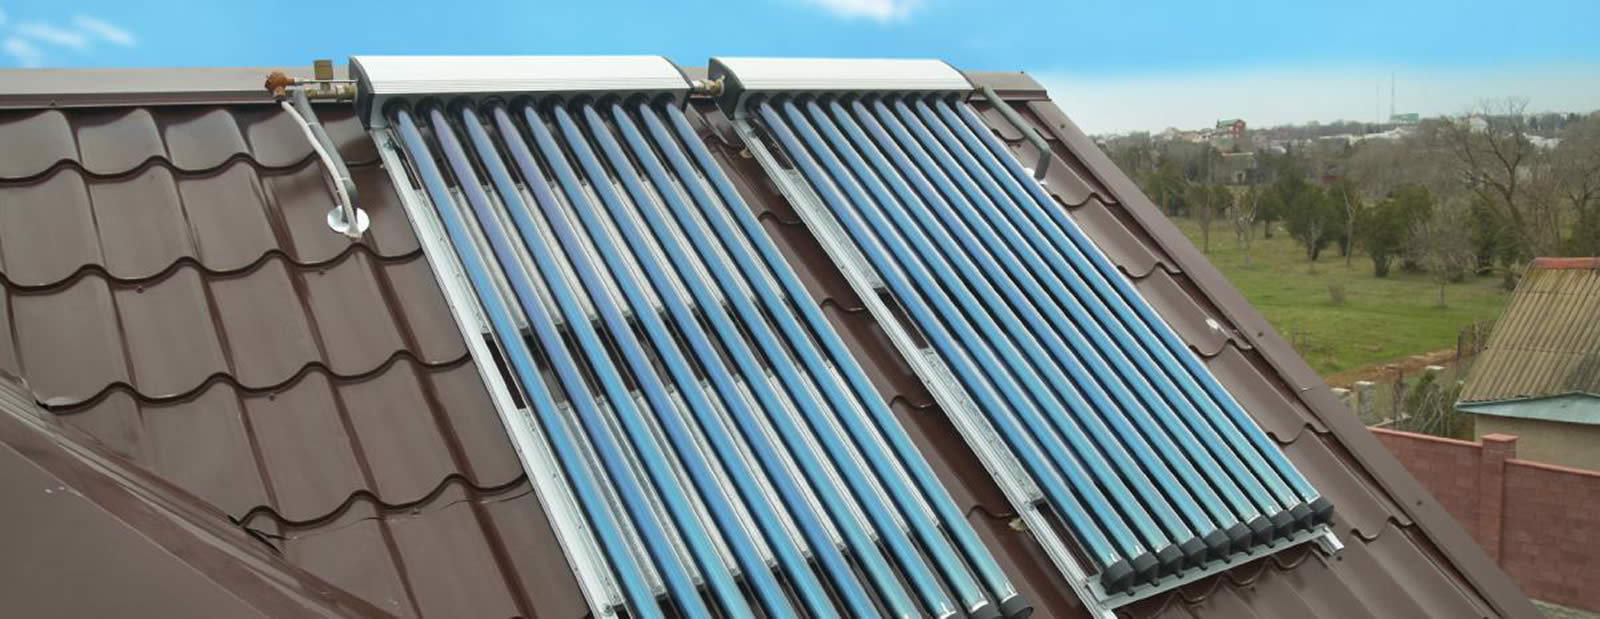 Peter Brown Solar Heating Services